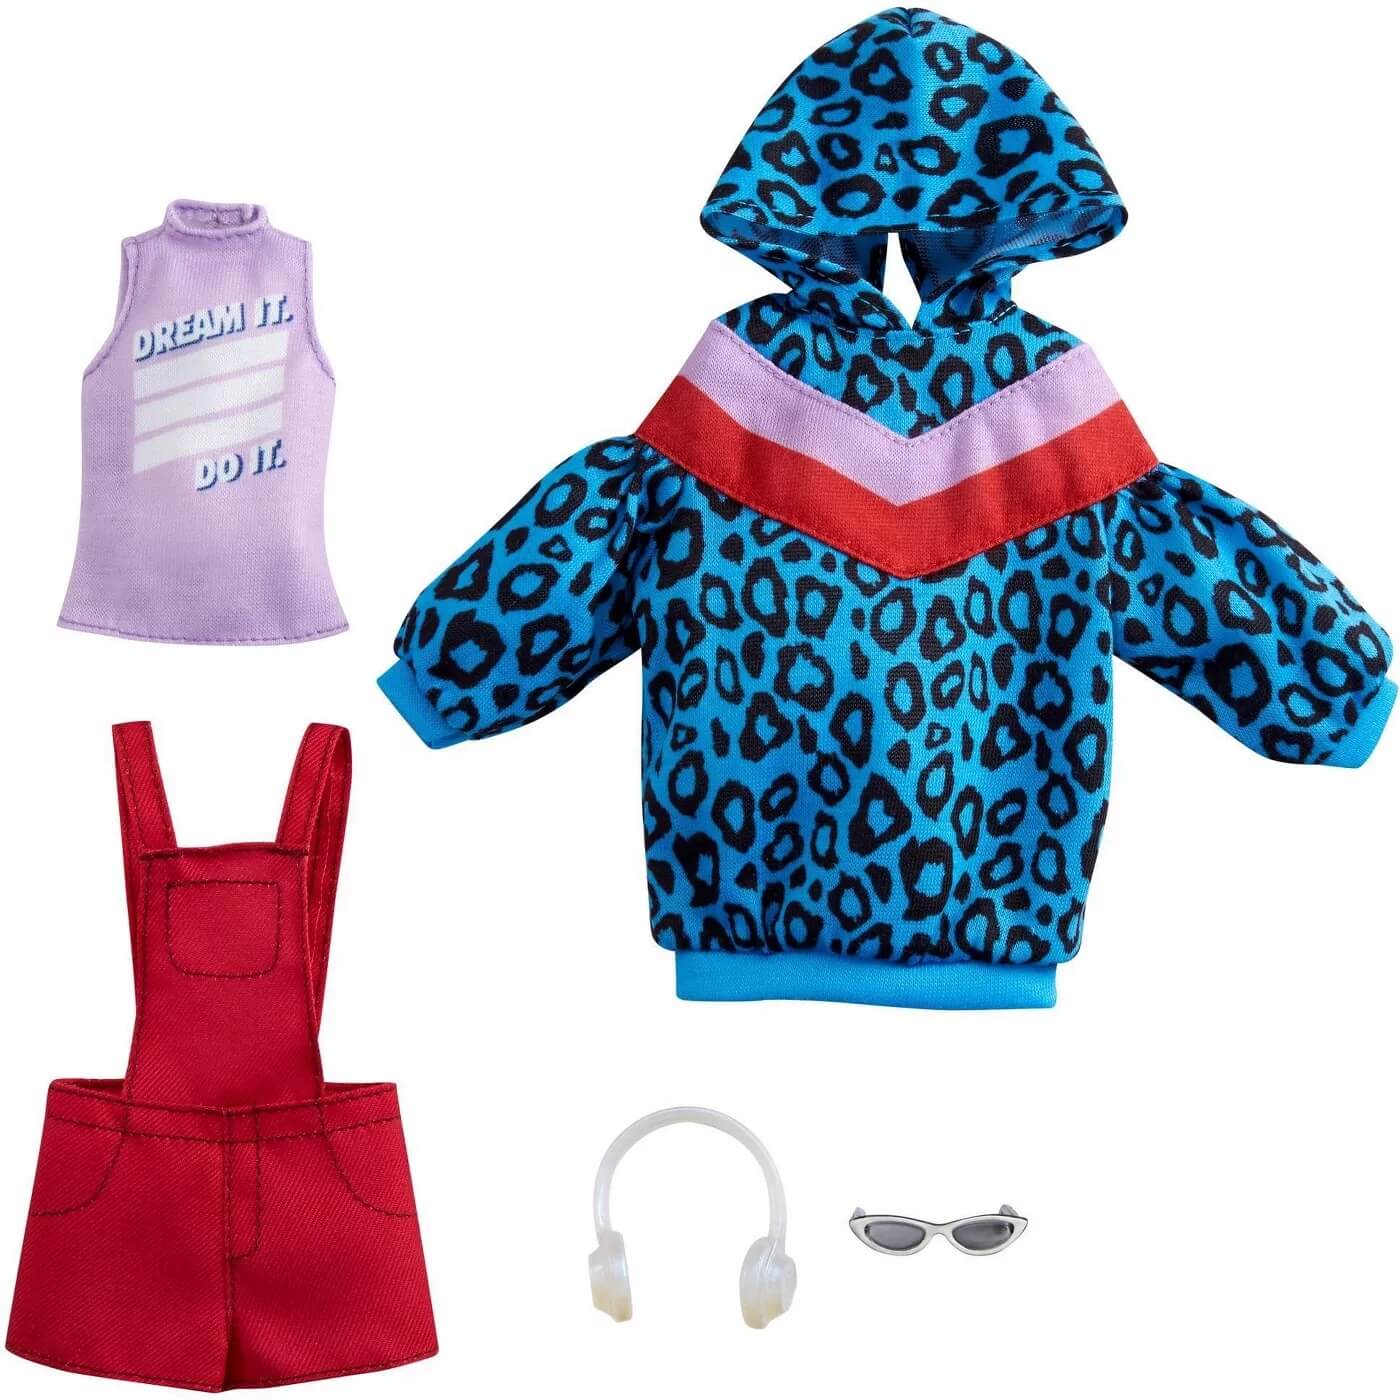 Barbie Fashions 2-Pack Clothing Set, 2 Outfits for Barbie Doll Include Animal-Print Hoodie Dress, Graphic Top, Red Overalls & 2 Accessories